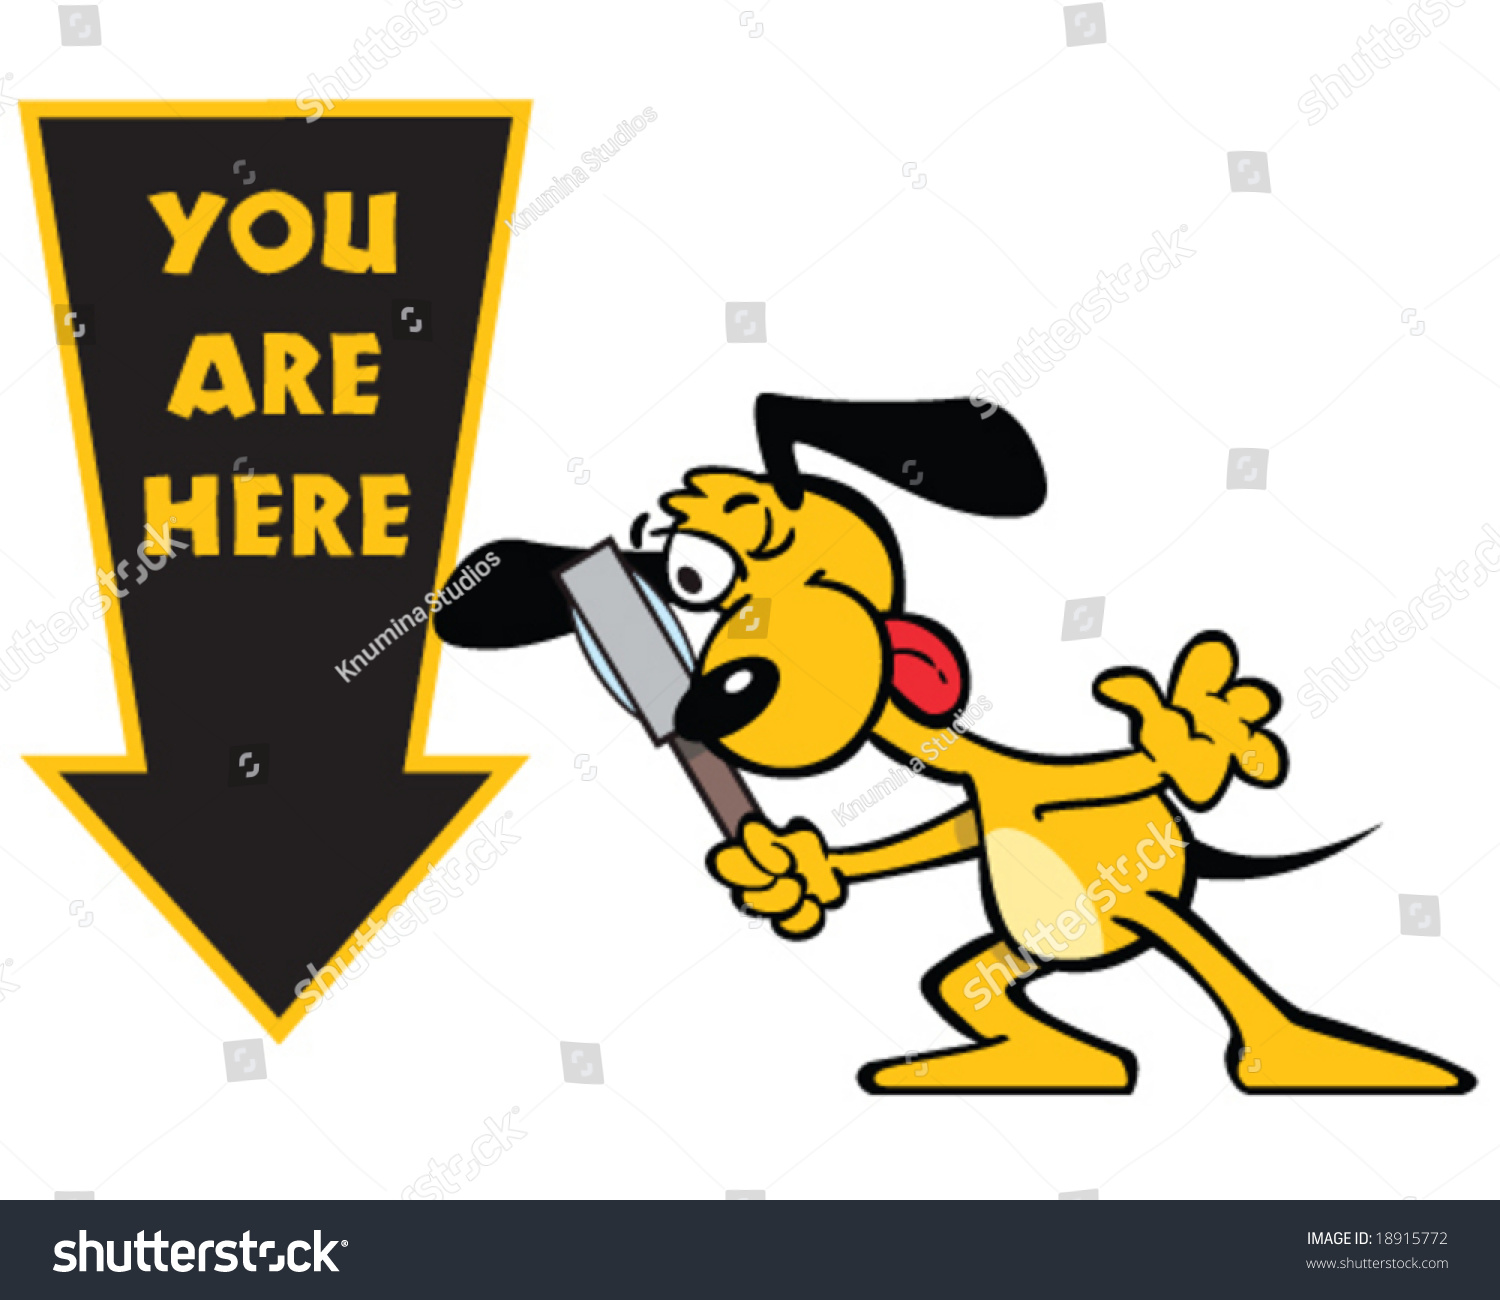 clip art you are here sign - photo #28